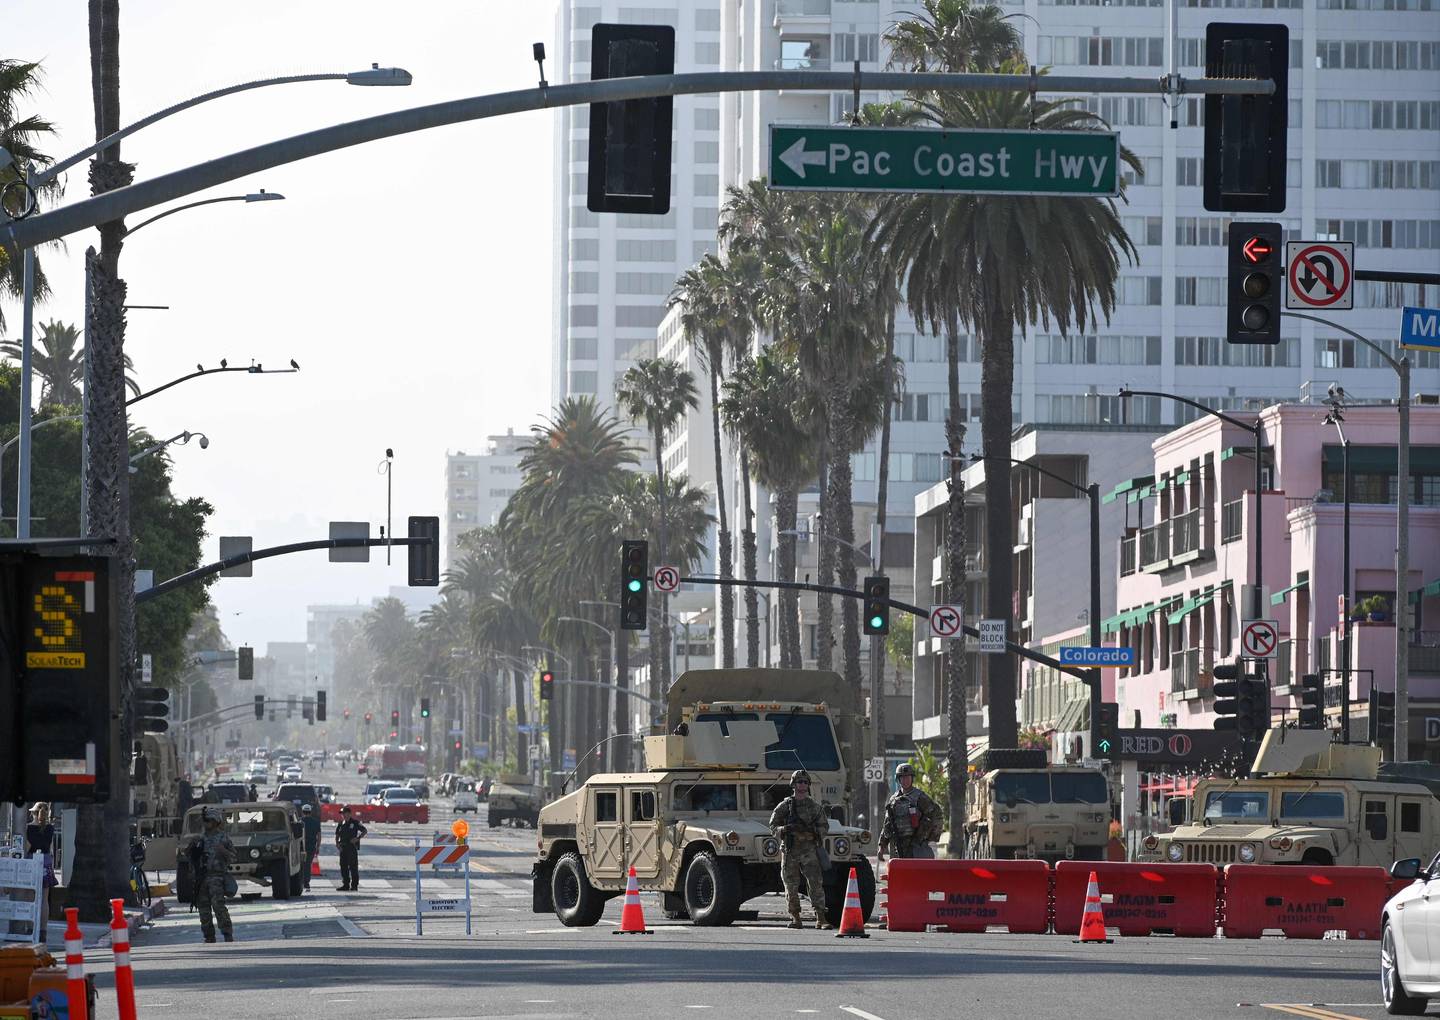 National Guard troops blockading Ocean Ave in Santa Monica, California June 3, 2020 where commercial streets are off limits following looting and destruction of shops in the area on Sunday night. (Photo by Robyn Beck / AFP)